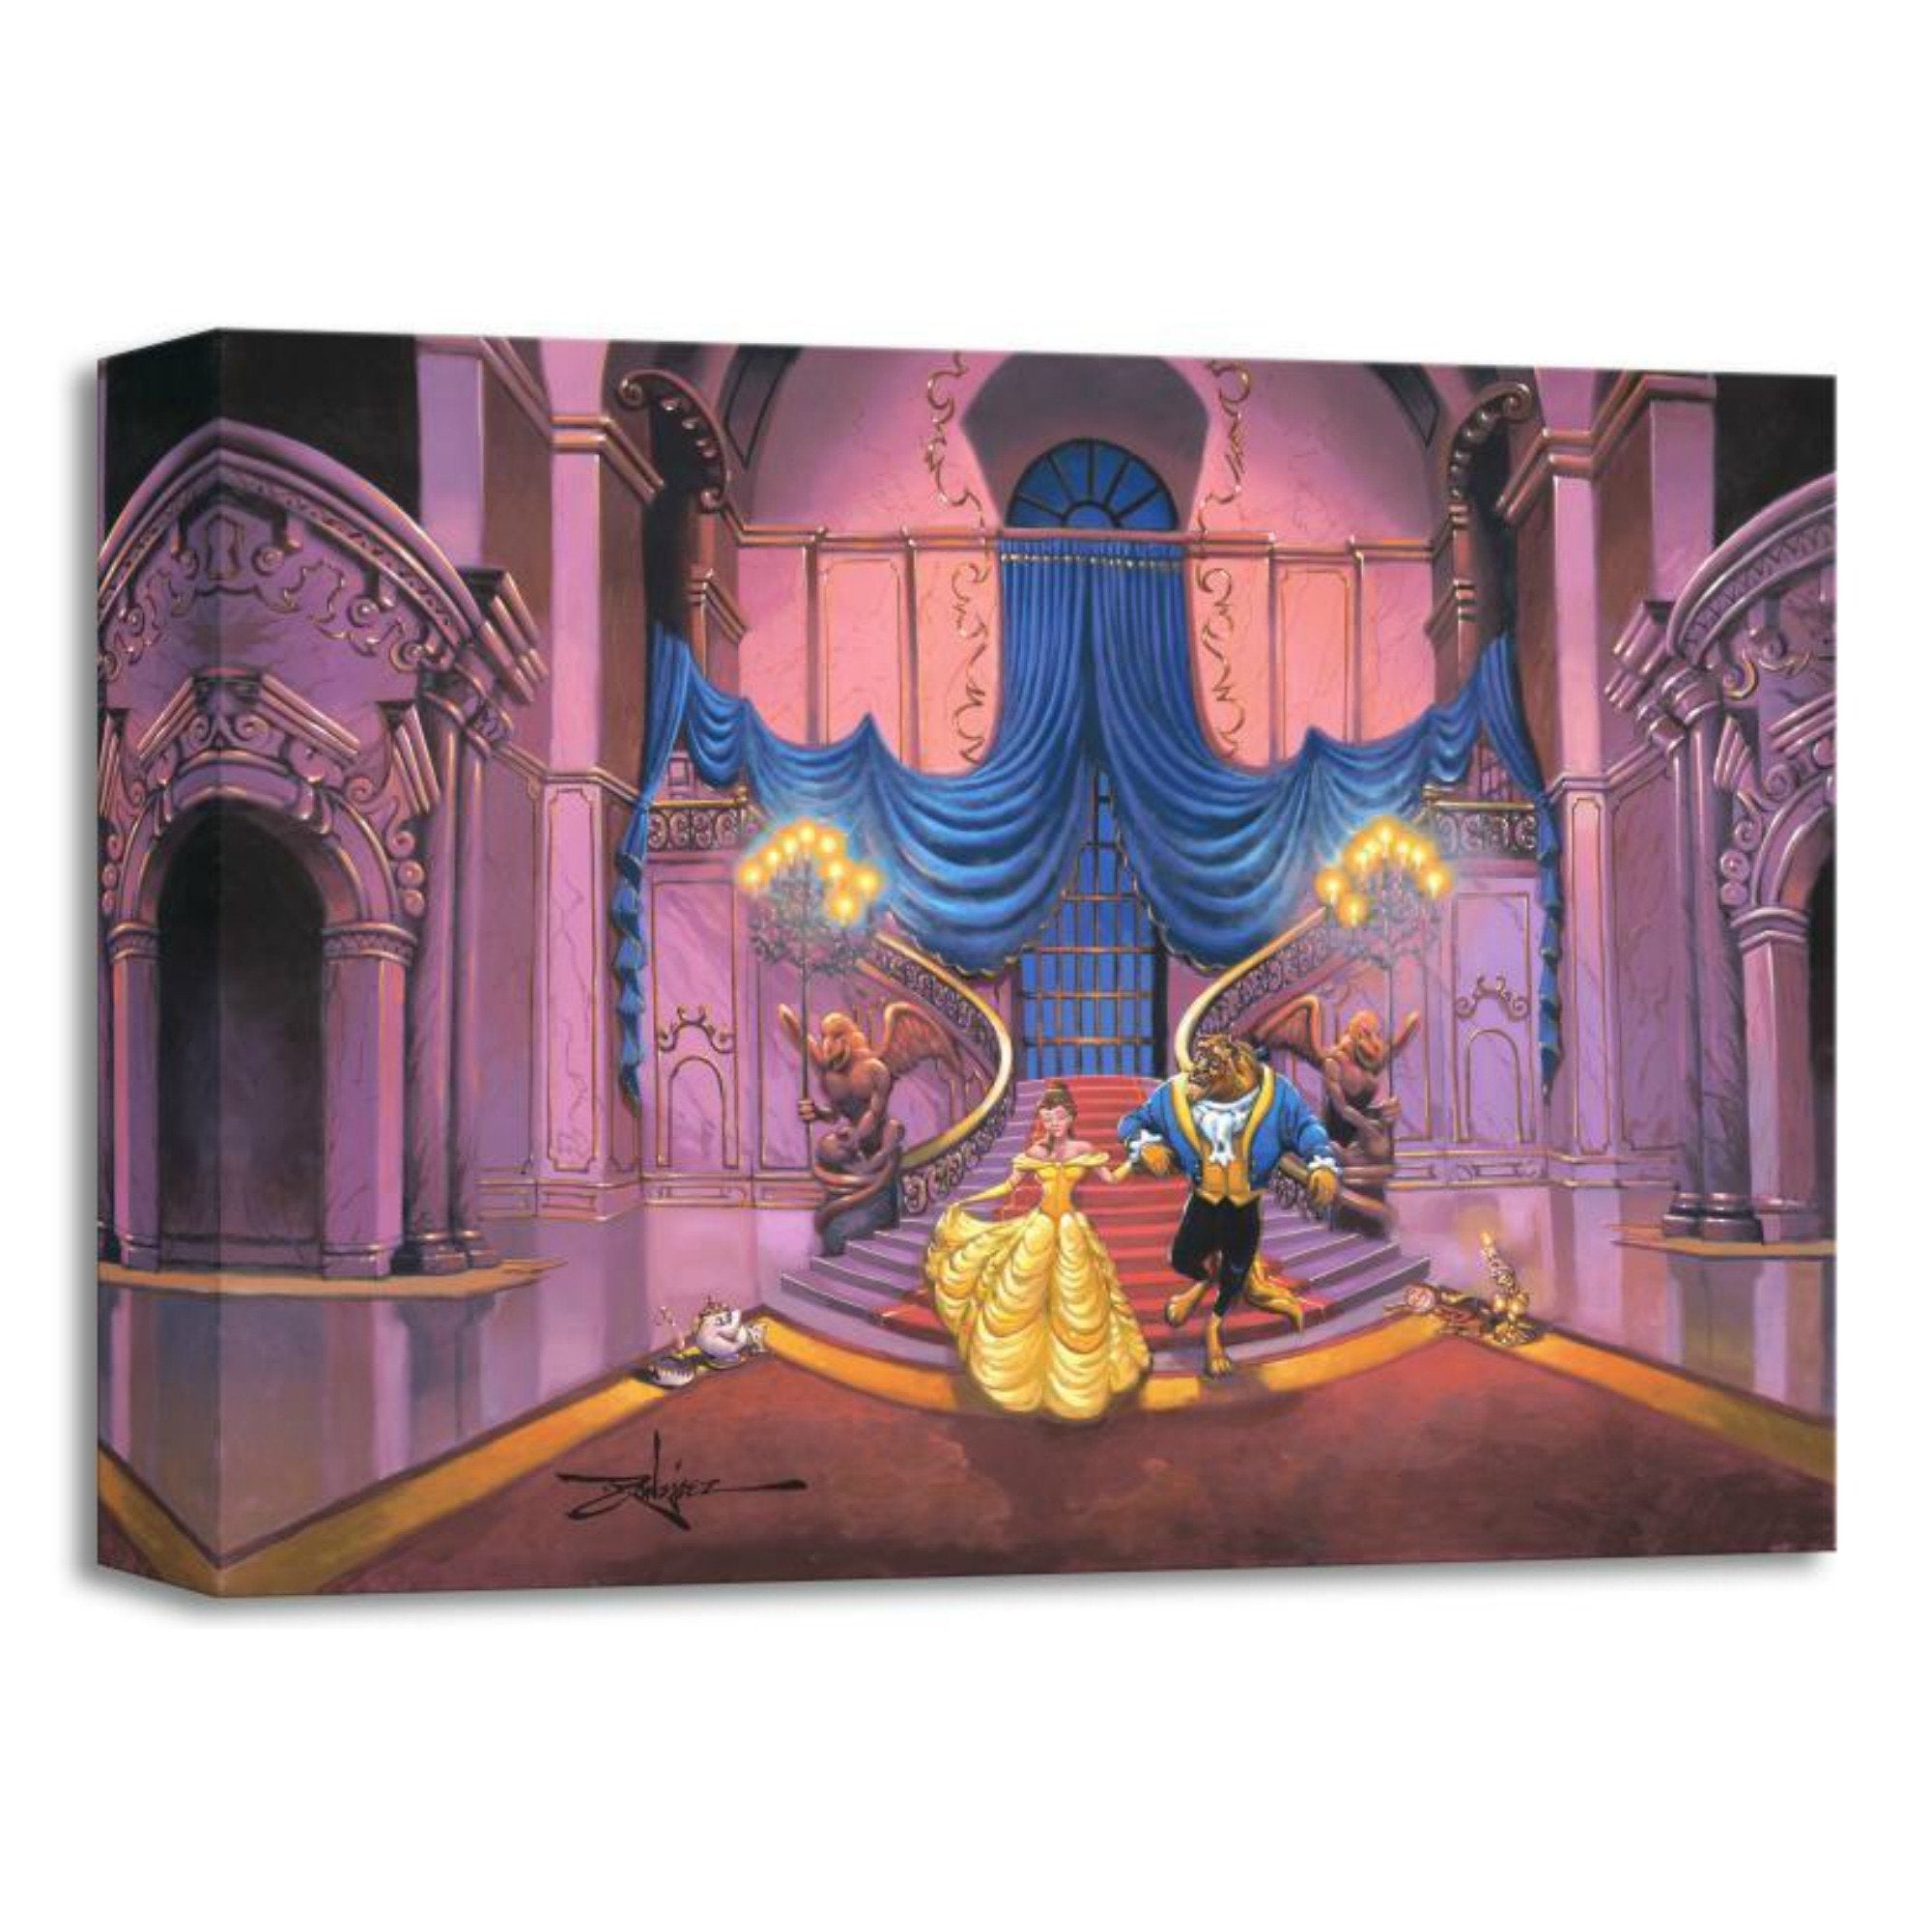 Tales as Old as Time by Rodel Gonzalez.  Belle in her beautiful yellow gown and the Beast make a big entrance as the castle's enchanted servants greet them at the bottom of the stairs. 